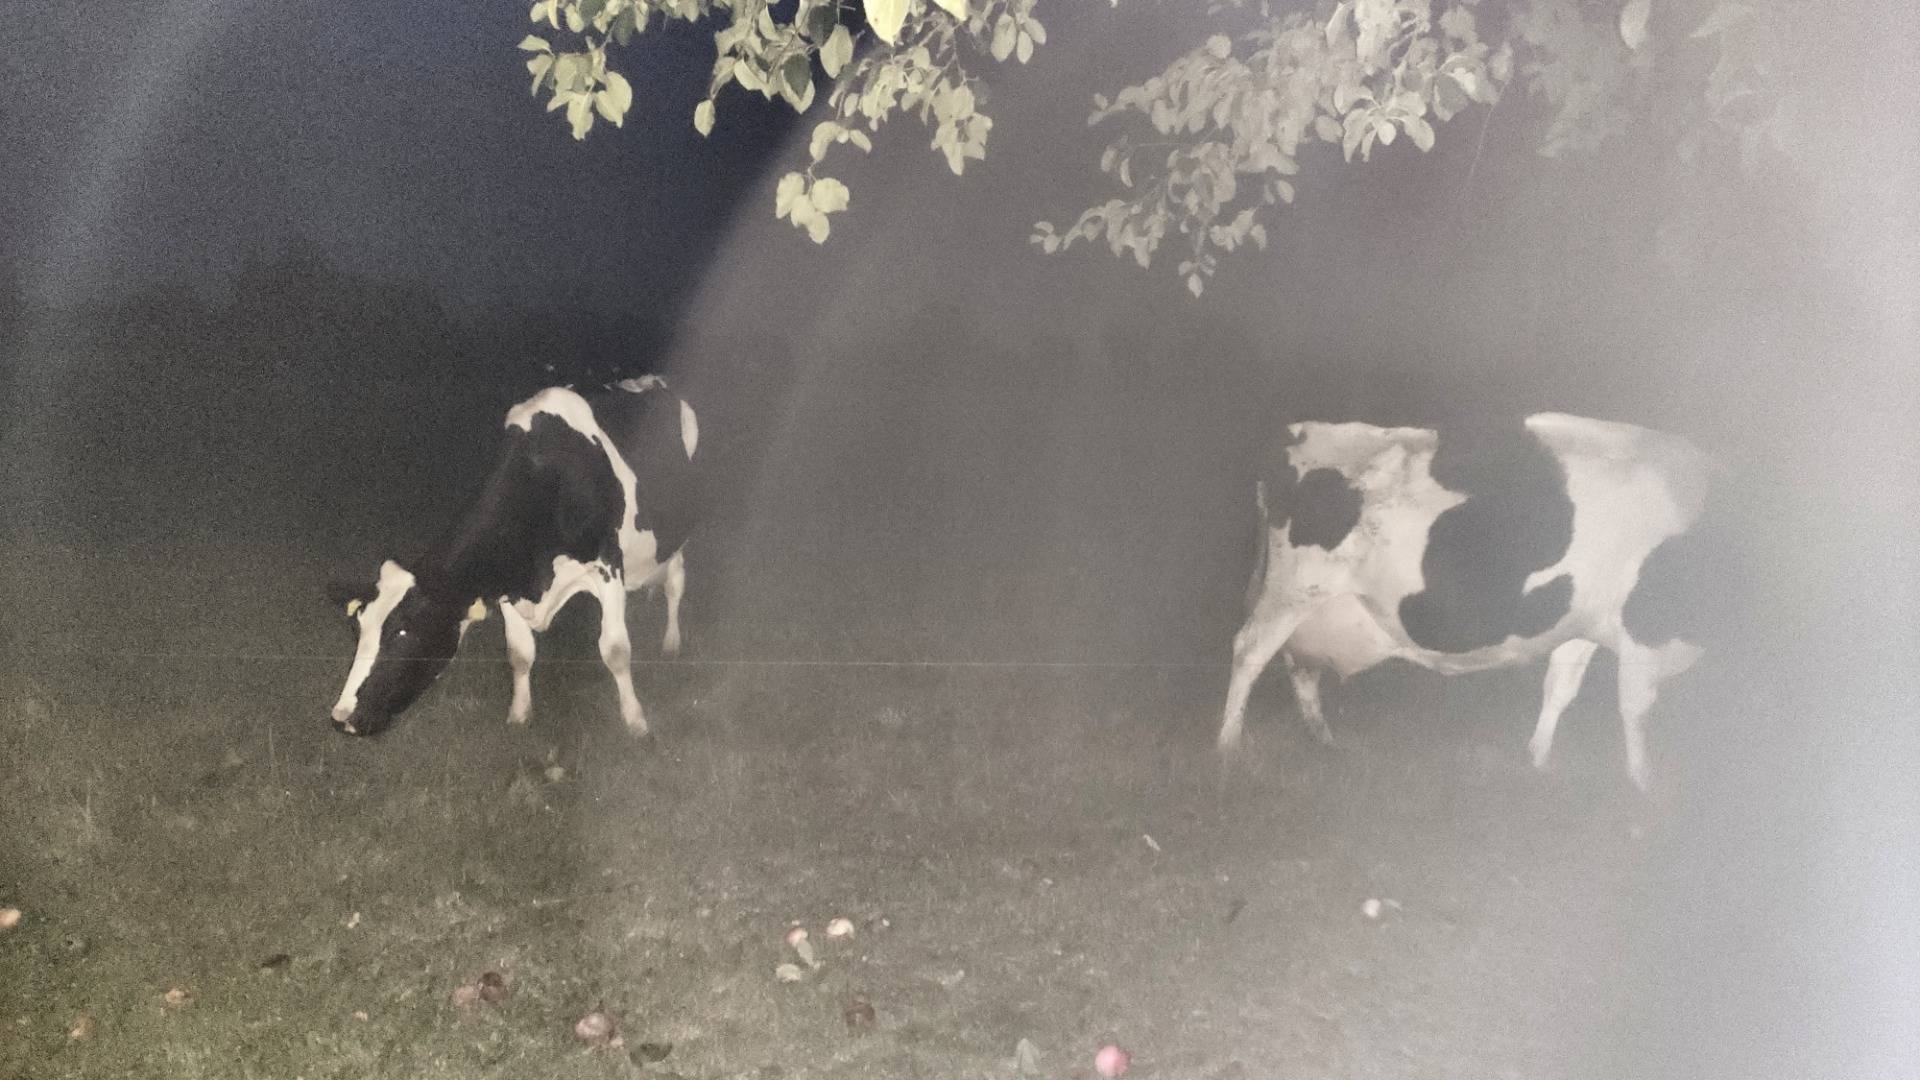 The cows of the night.